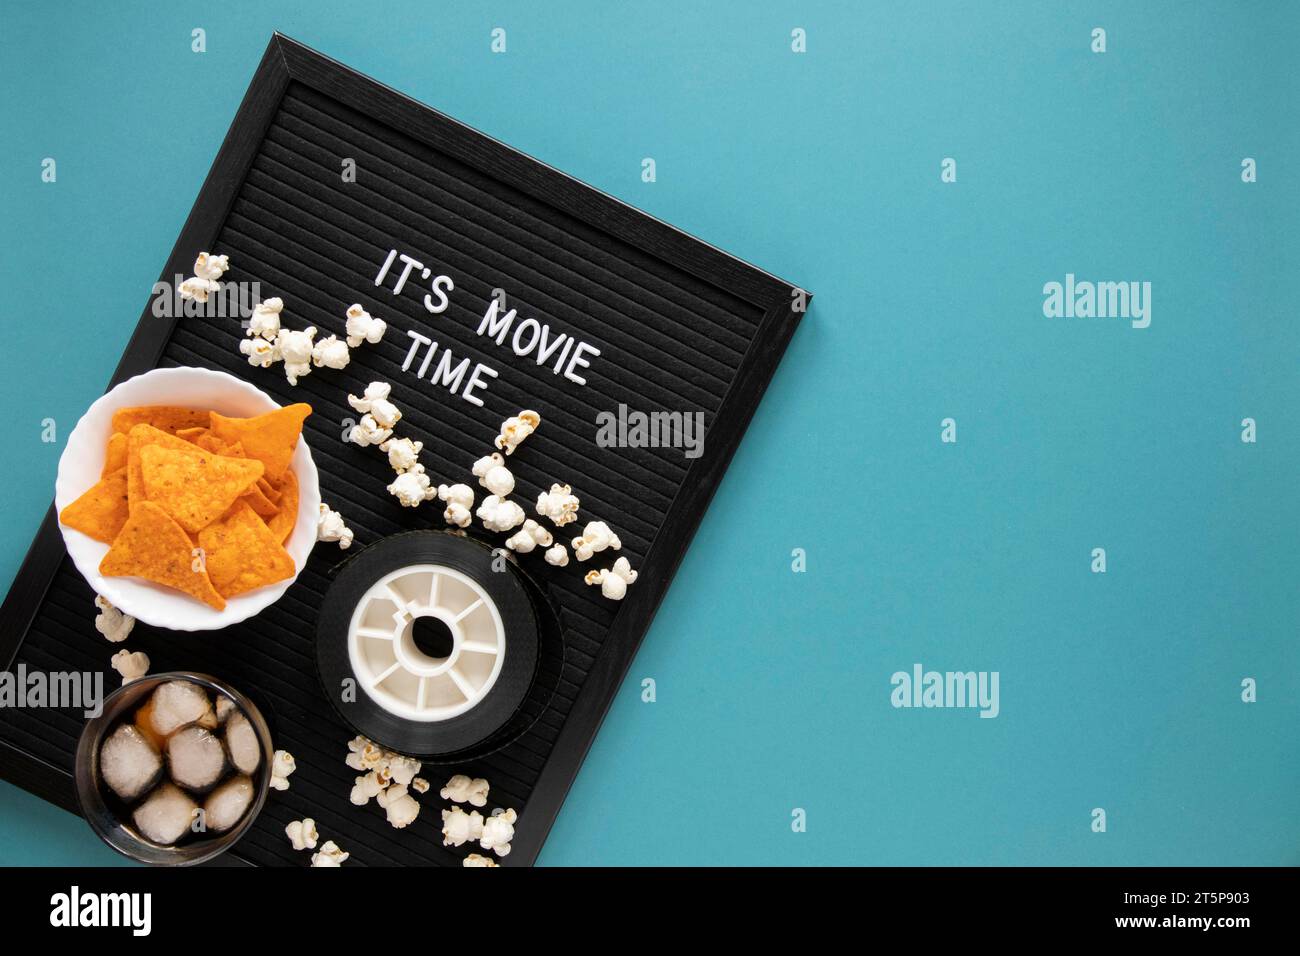 It s movie time lettering black board with movie goodies Stock Photo